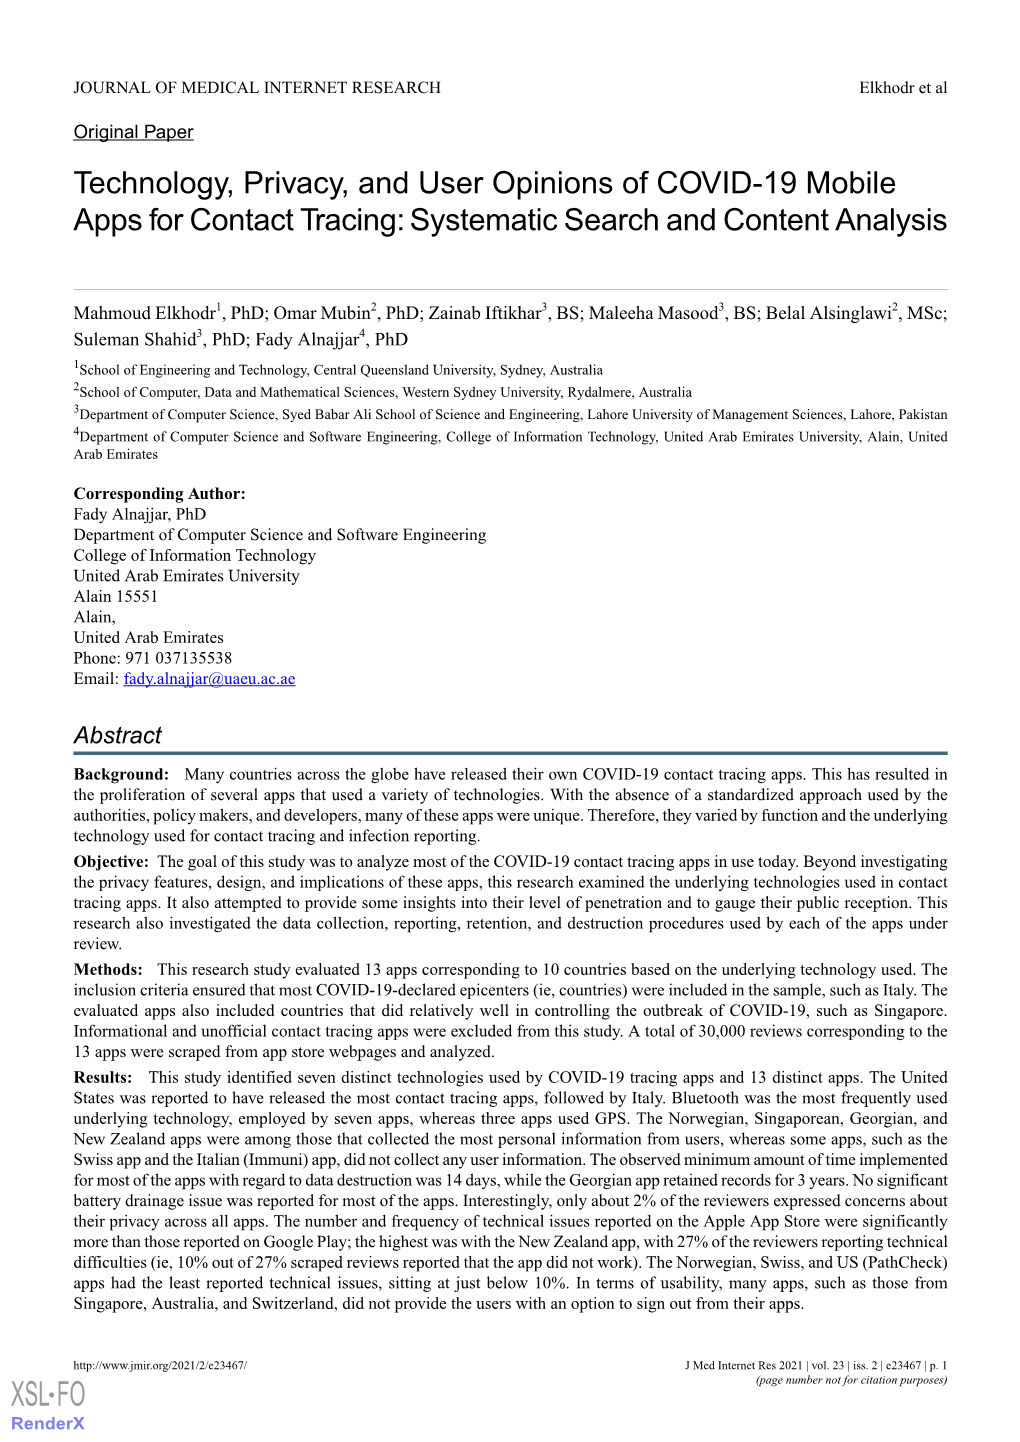 Technology, Privacy, and User Opinions of COVID-19 Mobile Apps for Contact Tracing: Systematic Search and Content Analysis